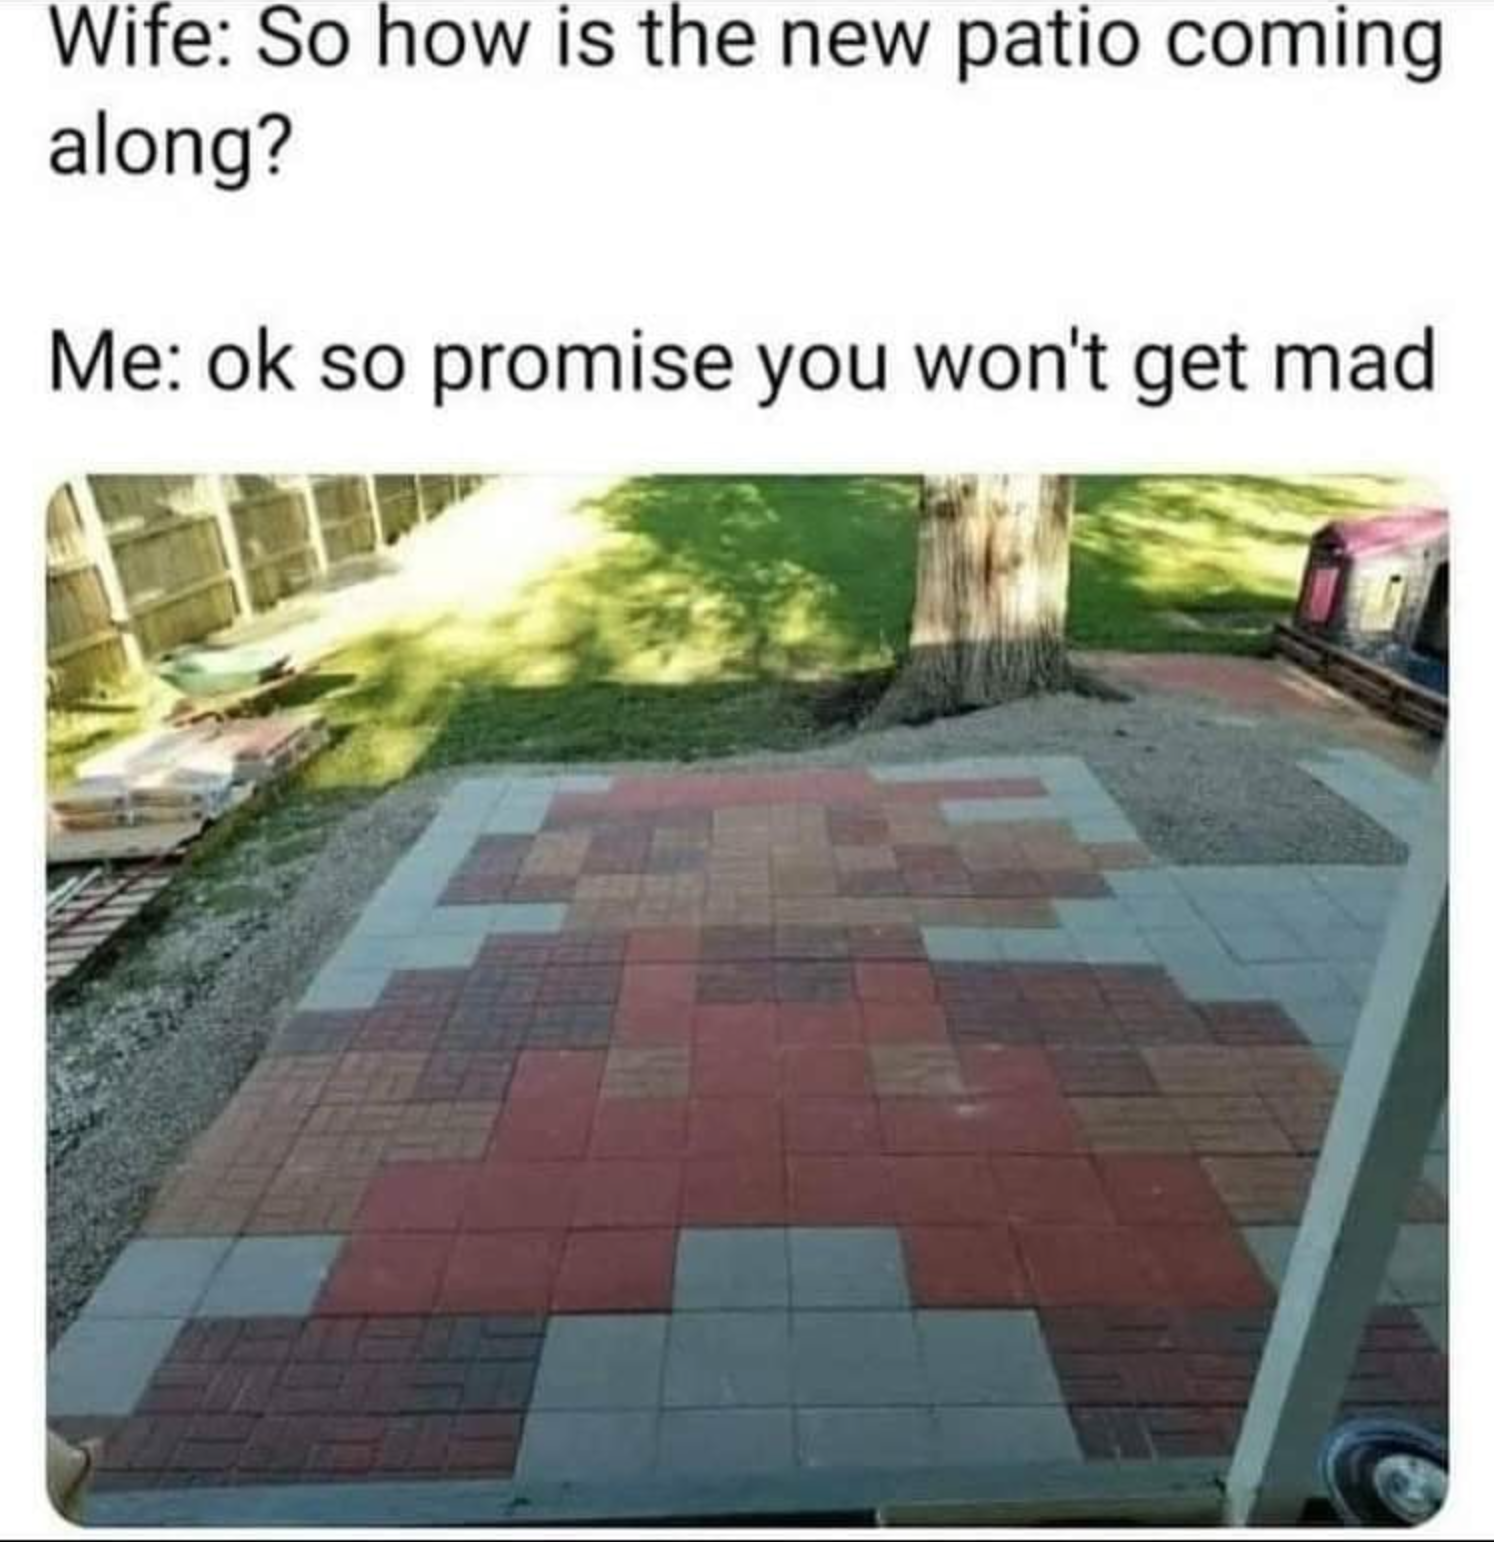 funny gaming memes - mario patio meme - Wife So how is the new patio coming along? Me ok so promise you won't get mad